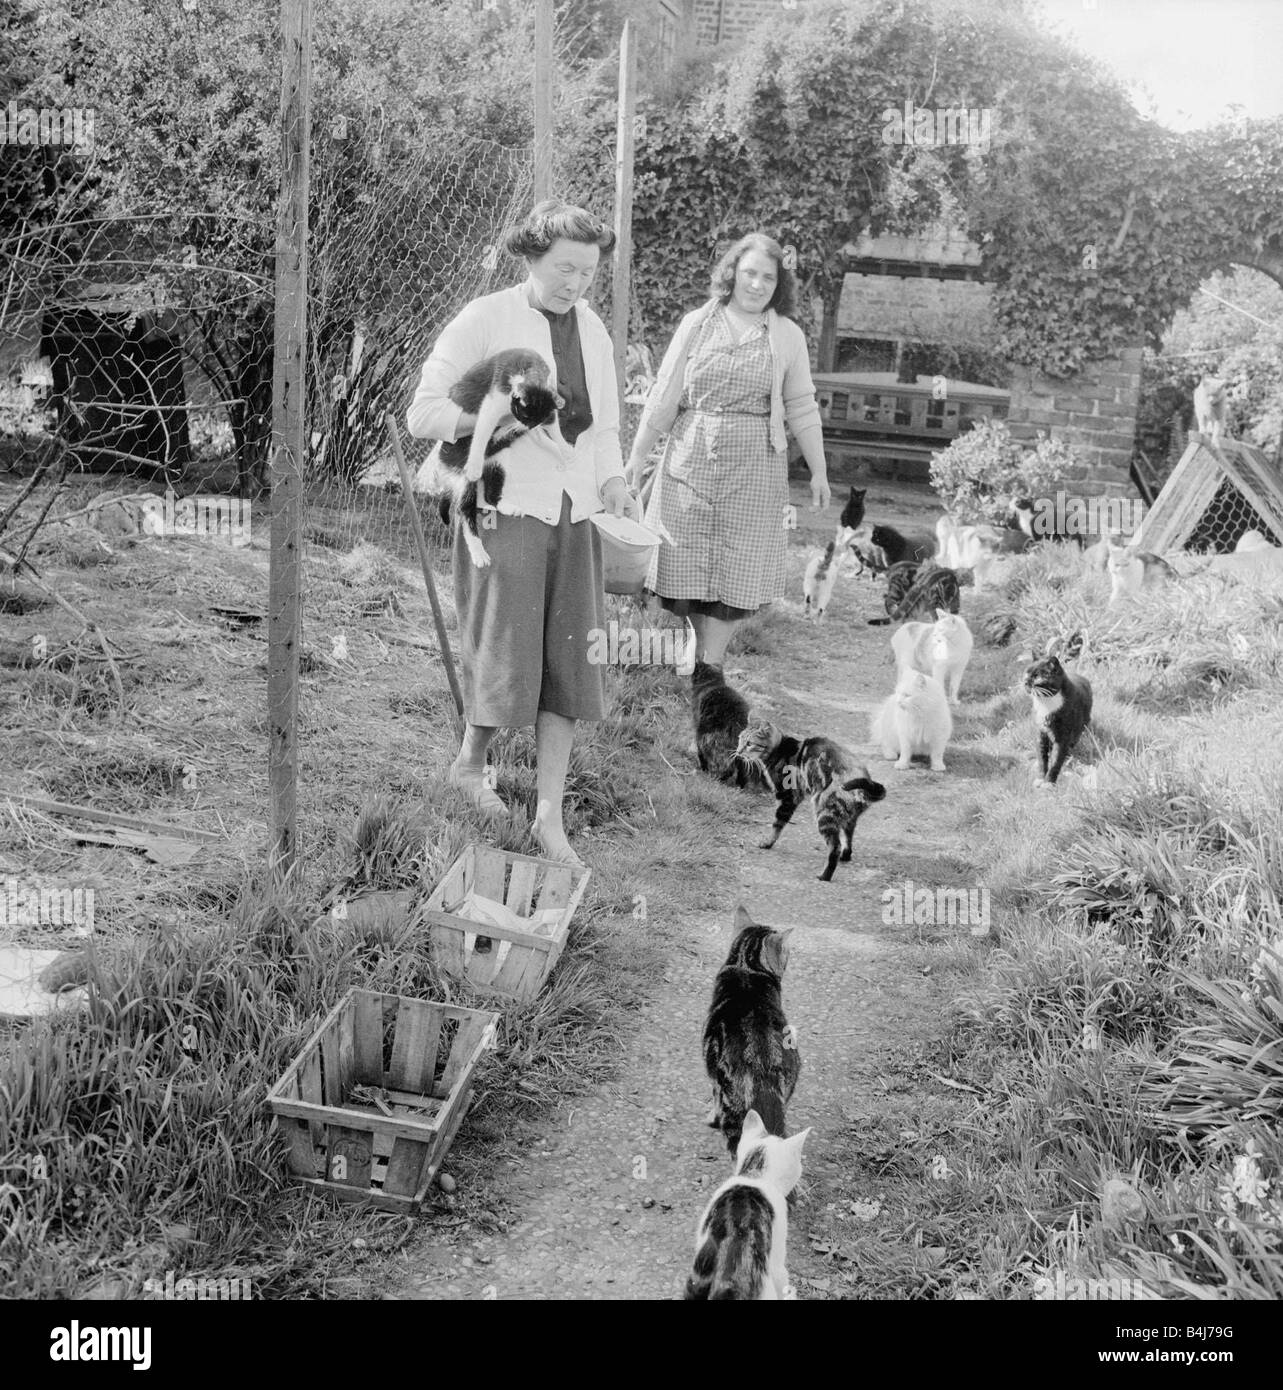 Cat home Animal friends May 1962 1960s Stock Photo